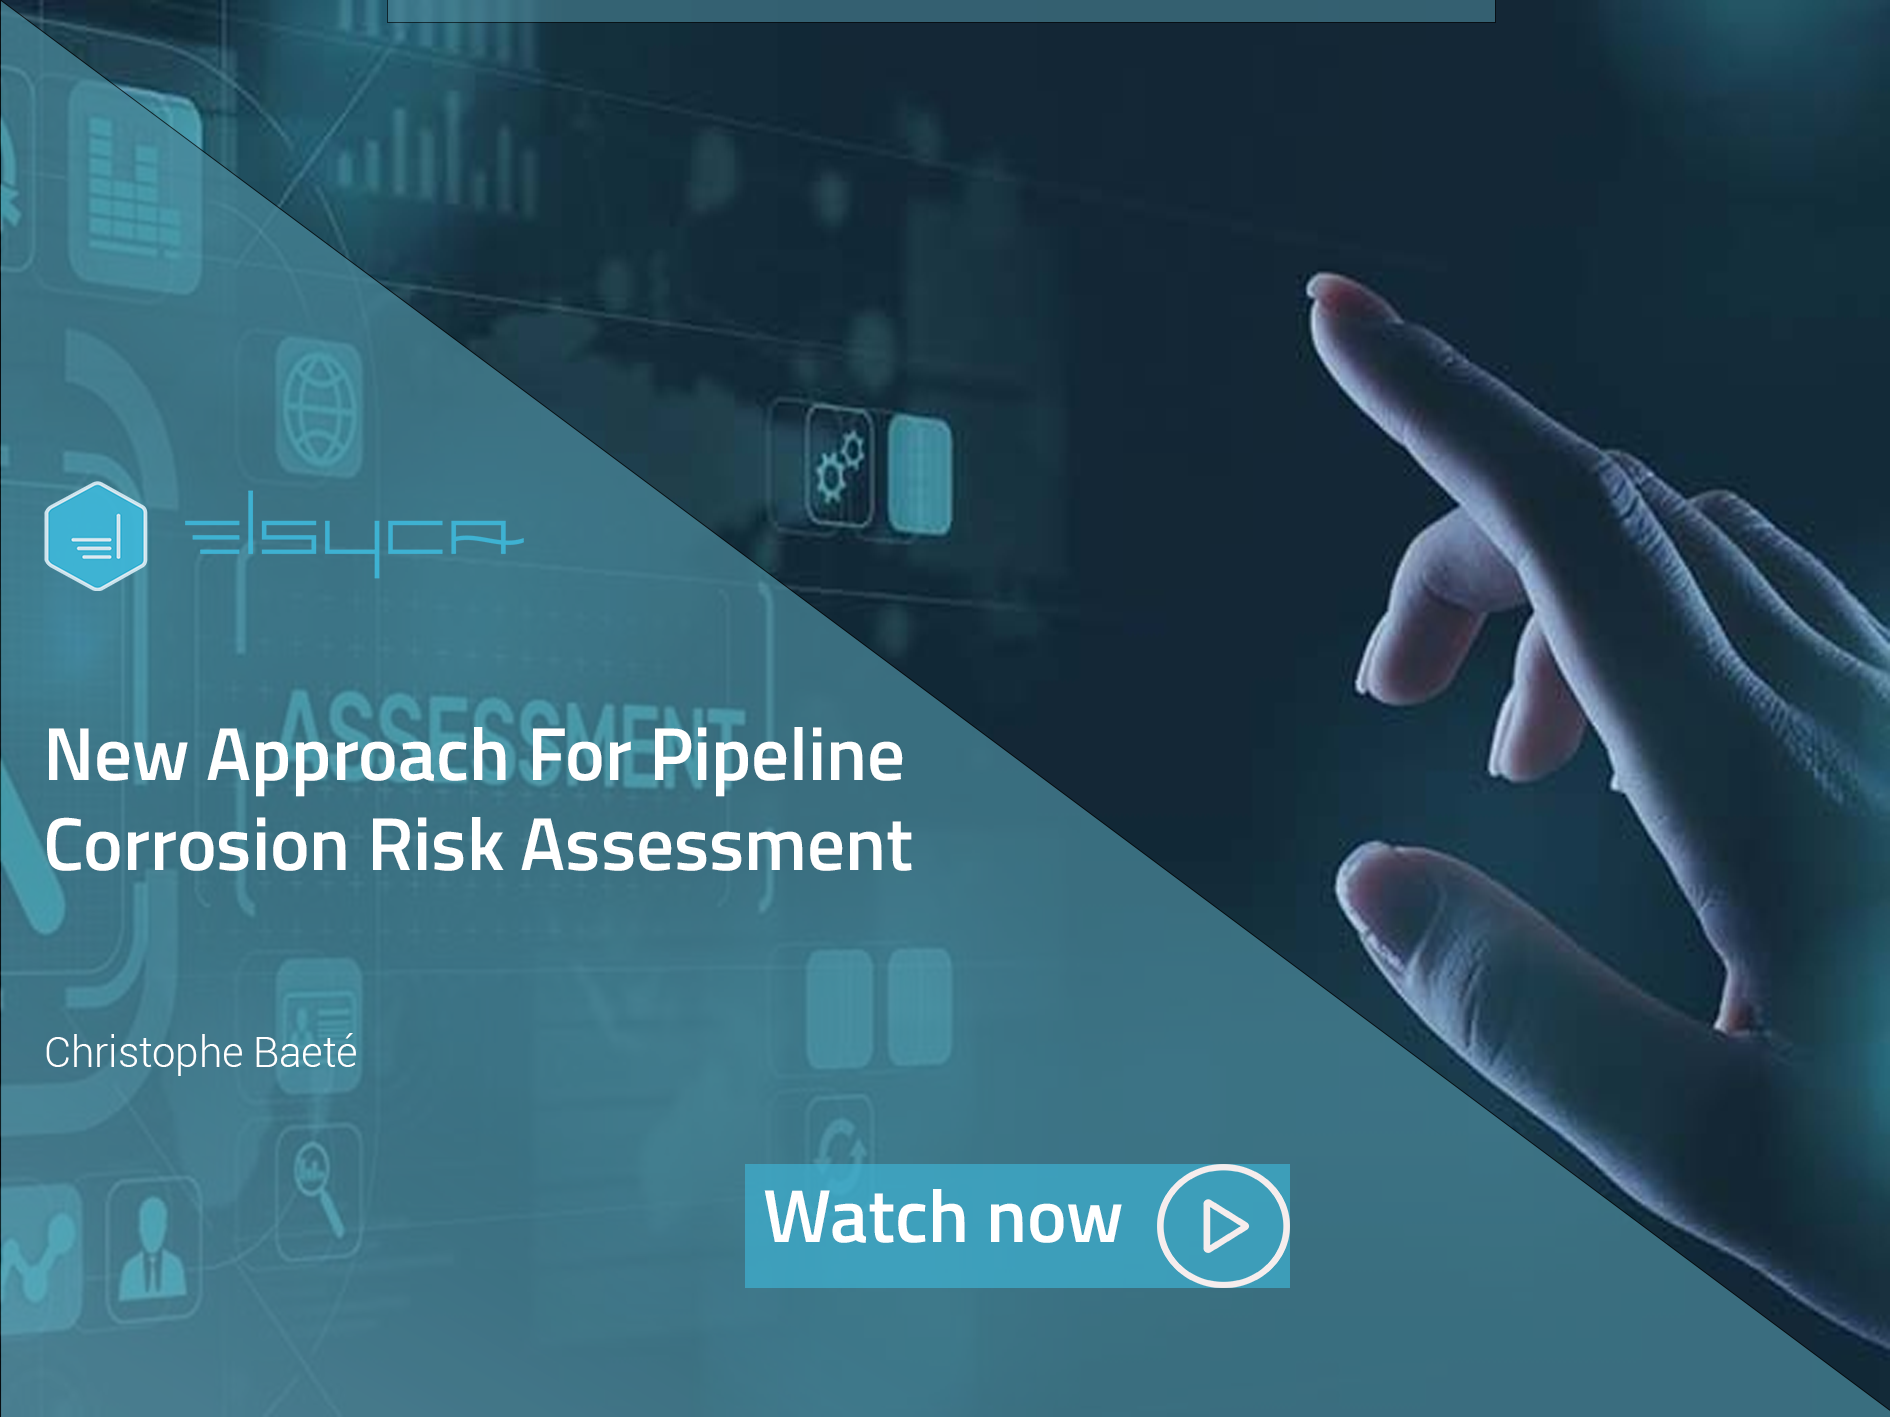 New Approach For Pipeline Corrosion Risk Assessment